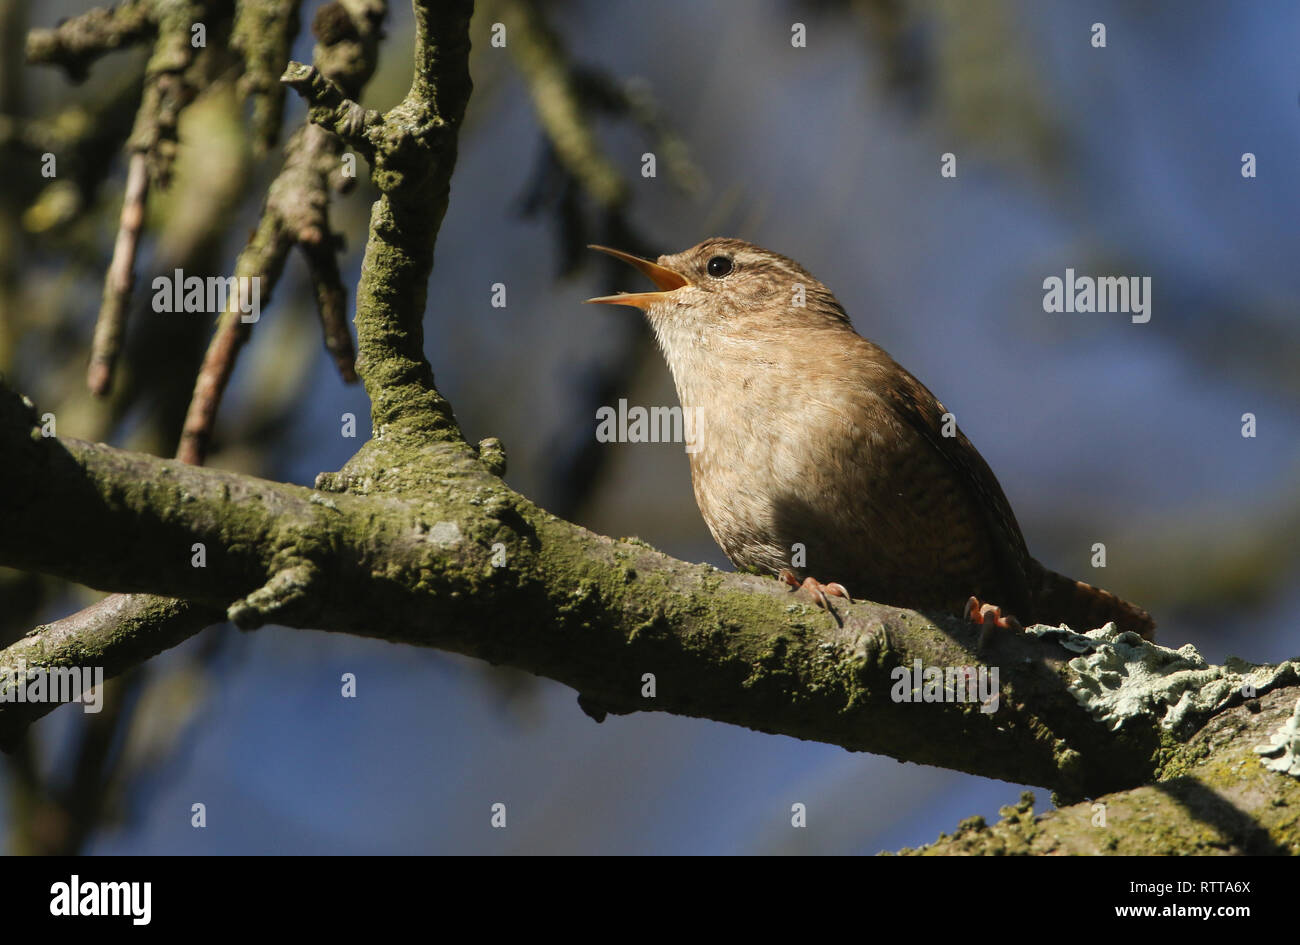 A singing Wren, Troglodytes troglodytes, perched on a branch high in a tree. Stock Photo